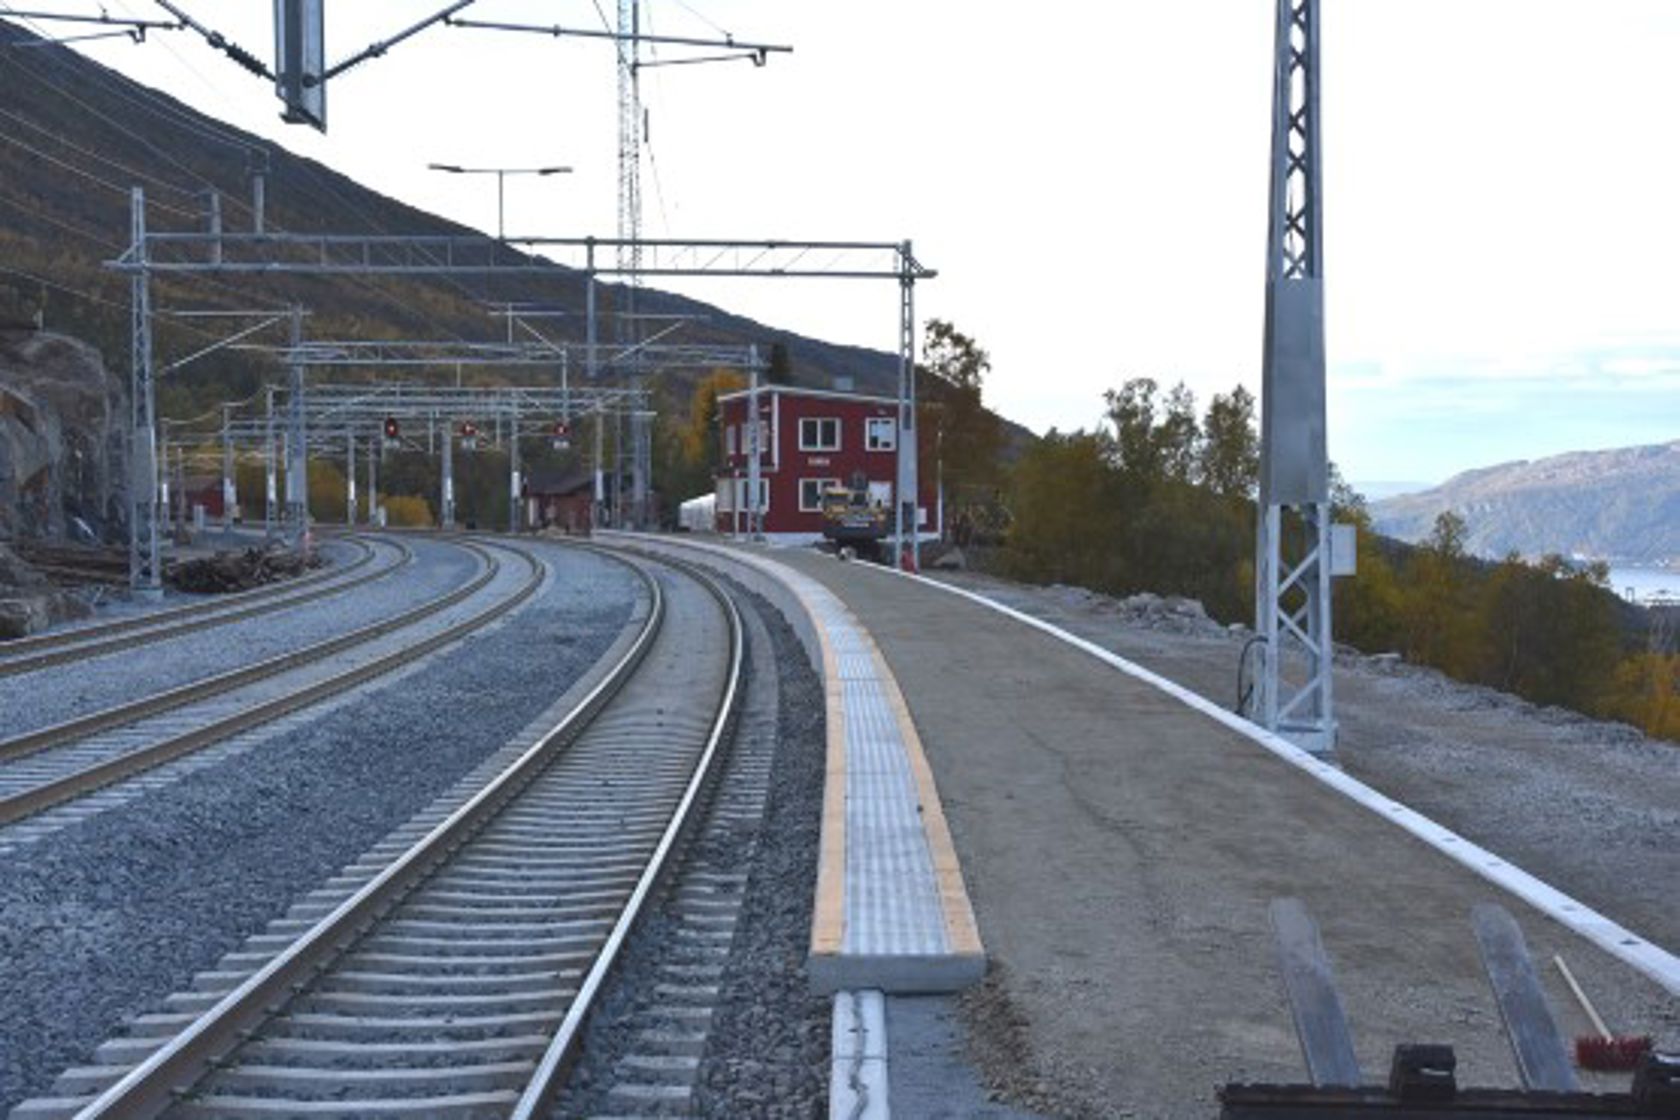 Exterior view of Rombak station